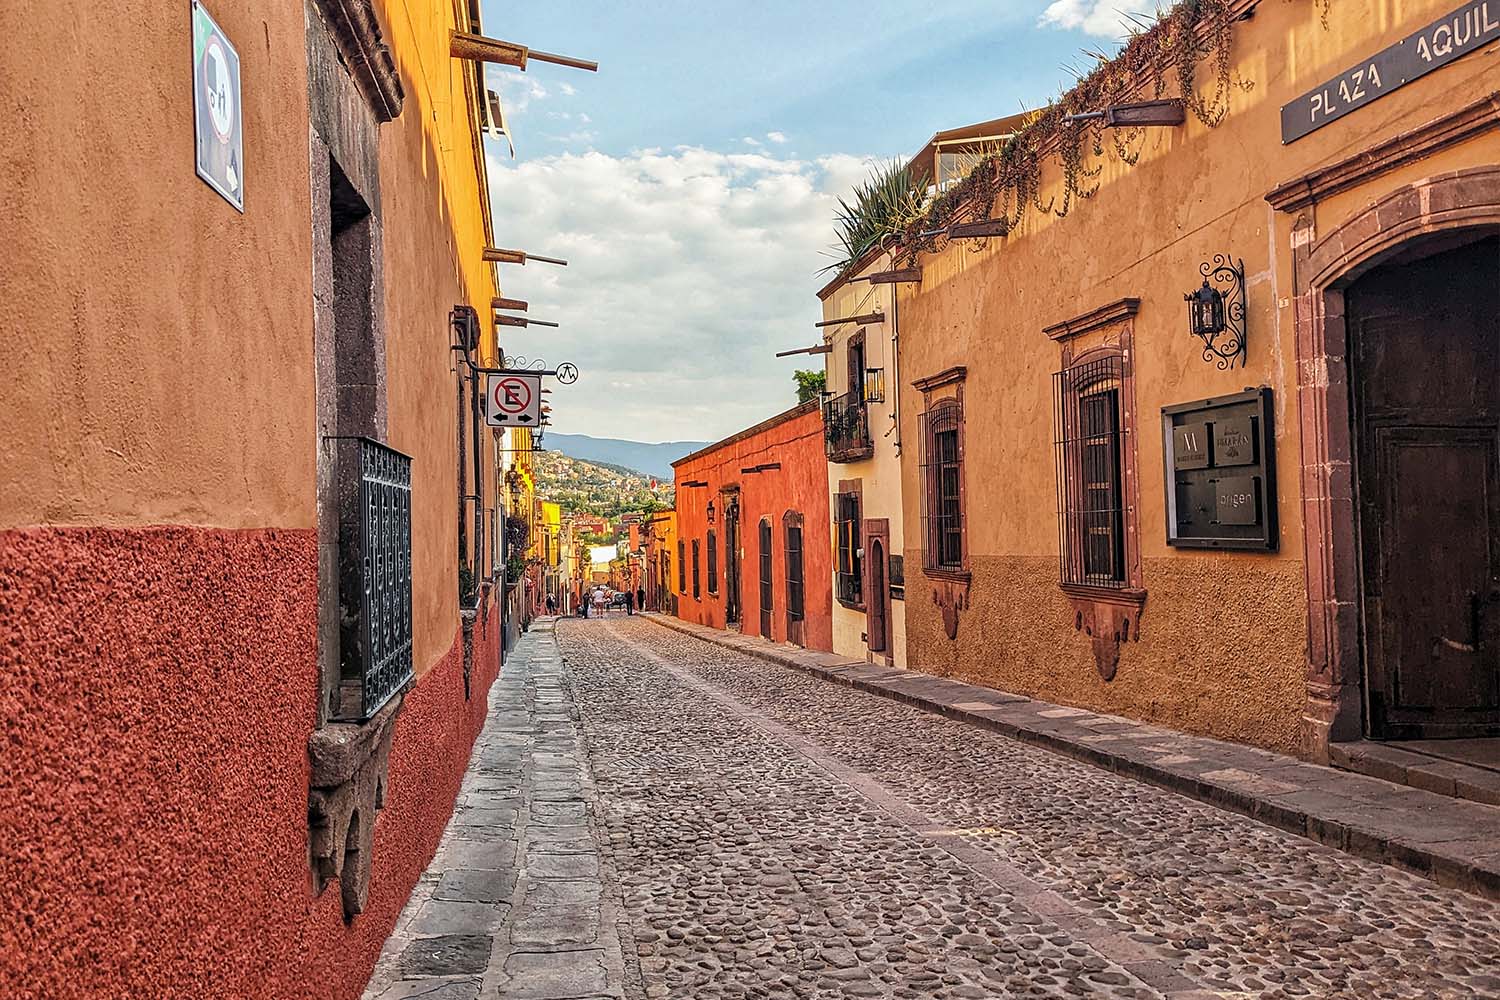 The streets of San Miguel